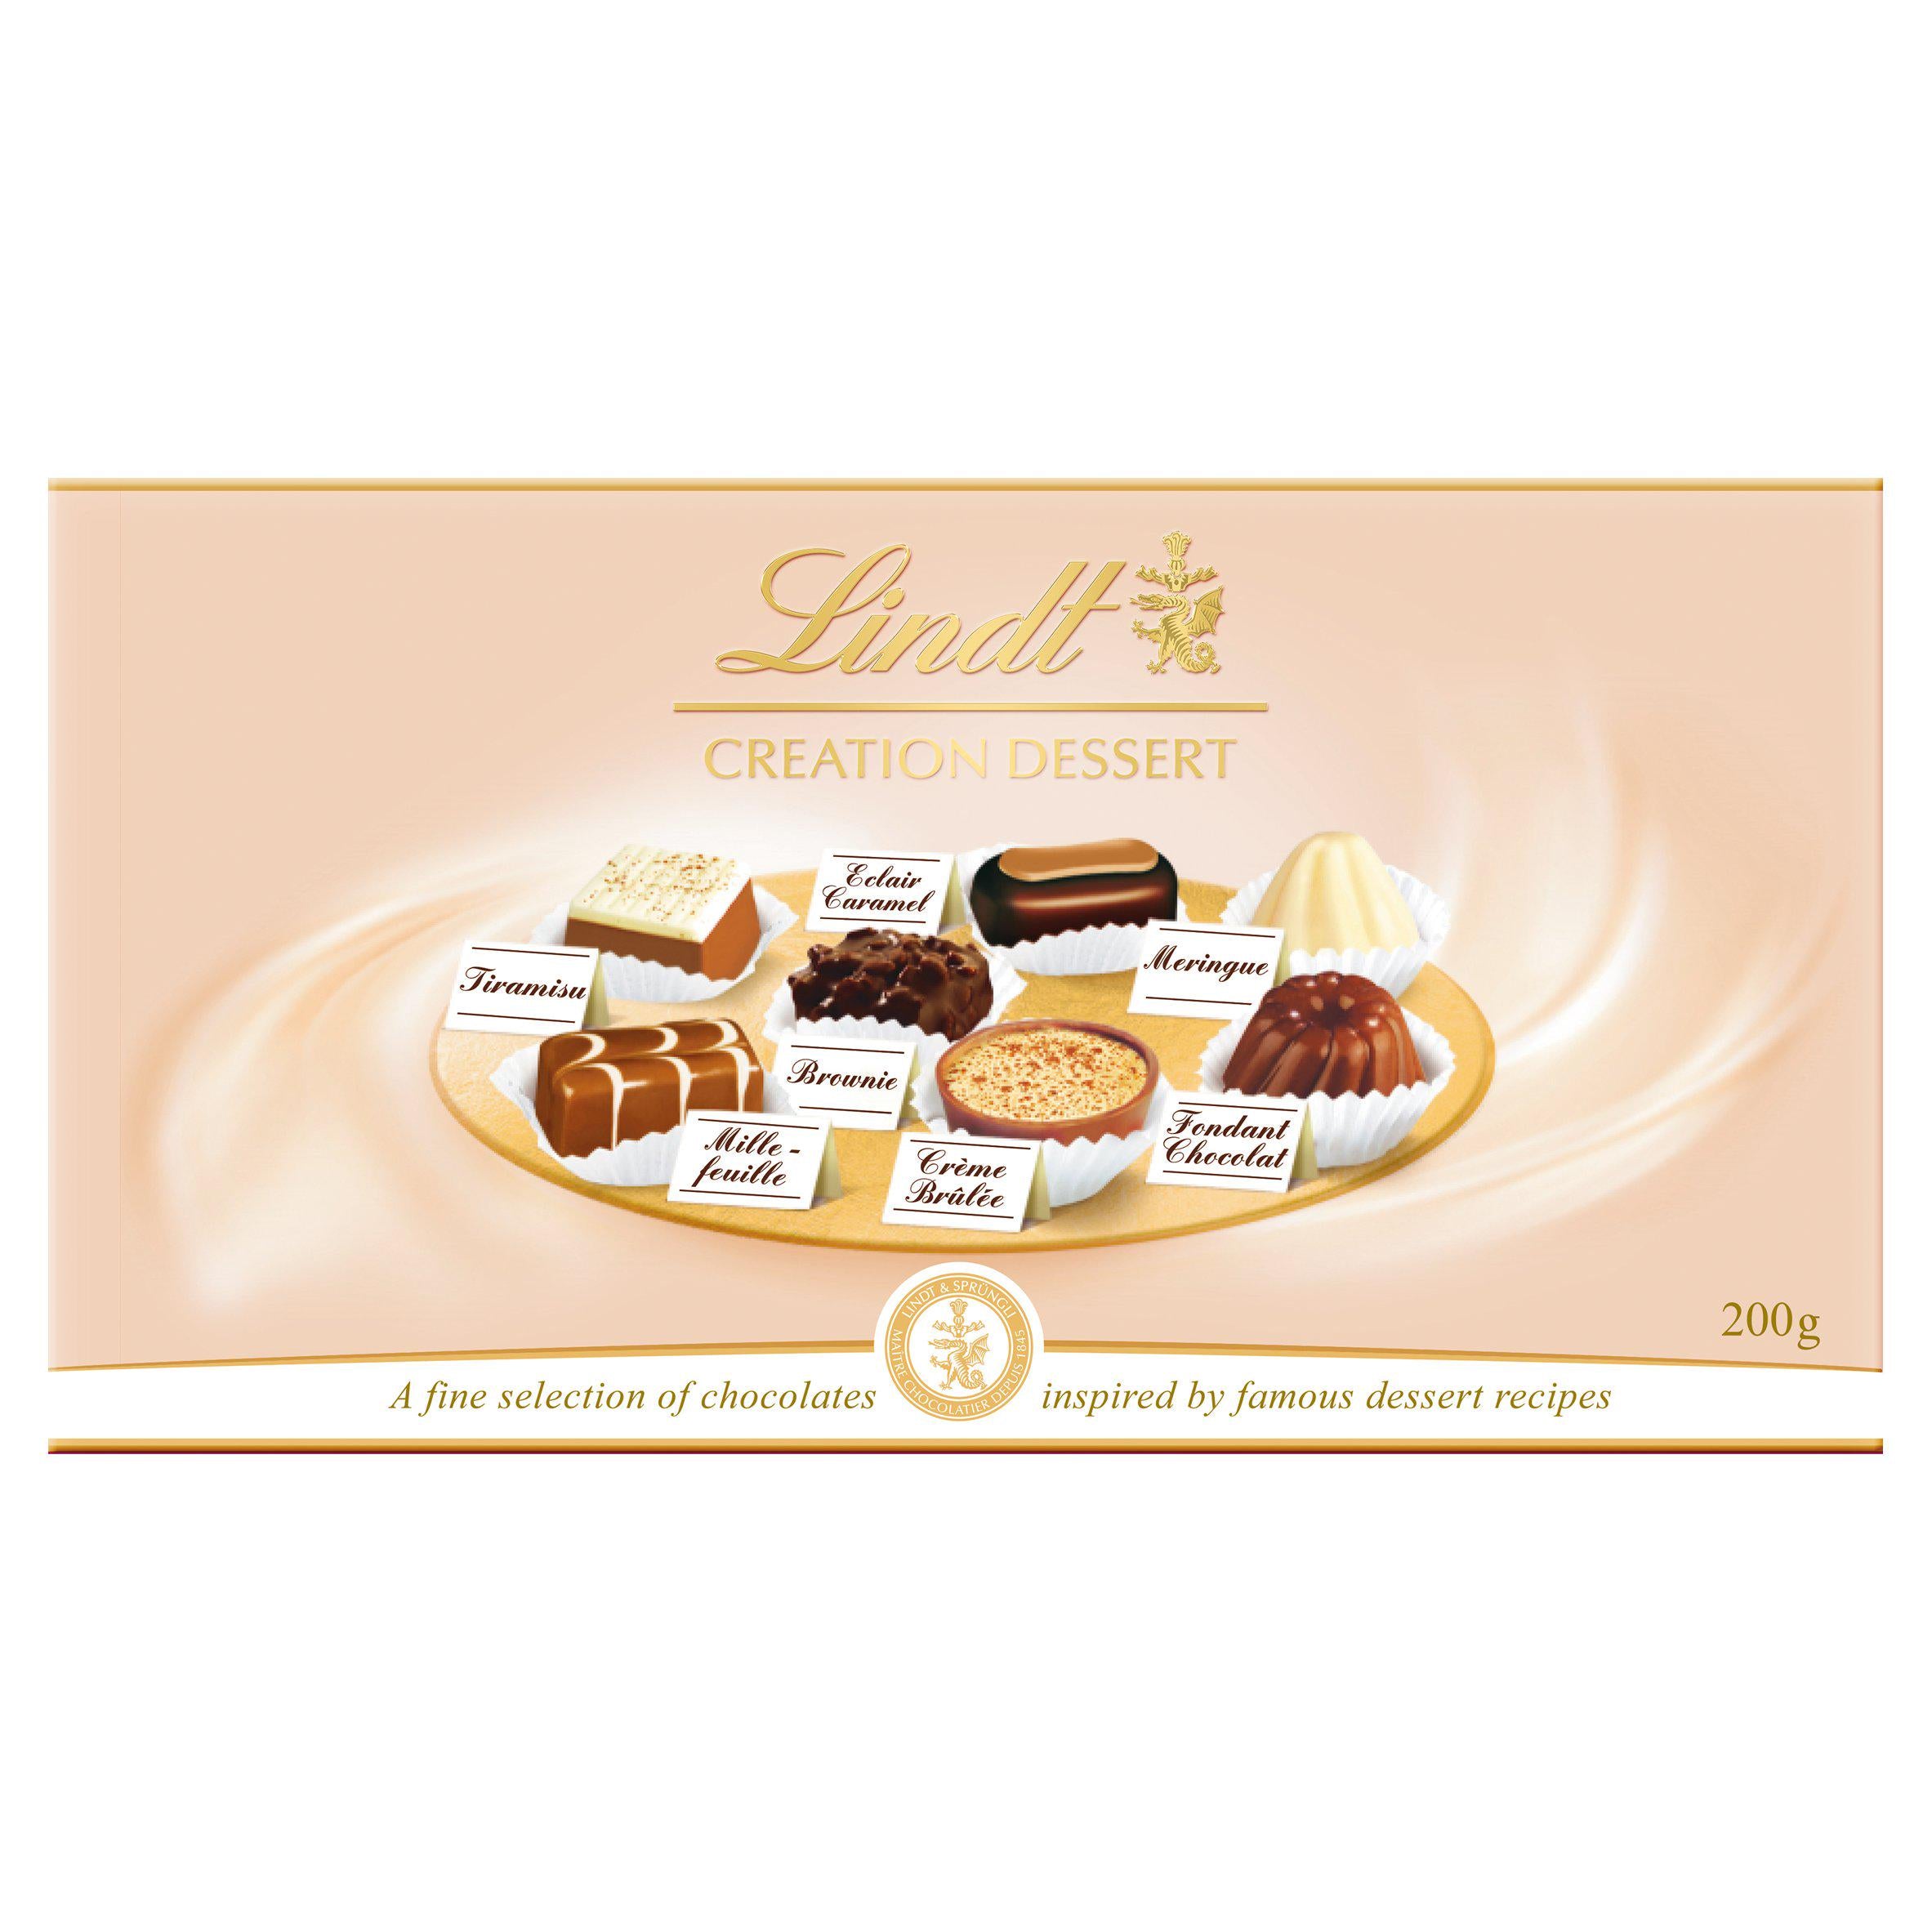 ONN the WAY - Lindt Creation Dessert 200gms Was 1800/- Now